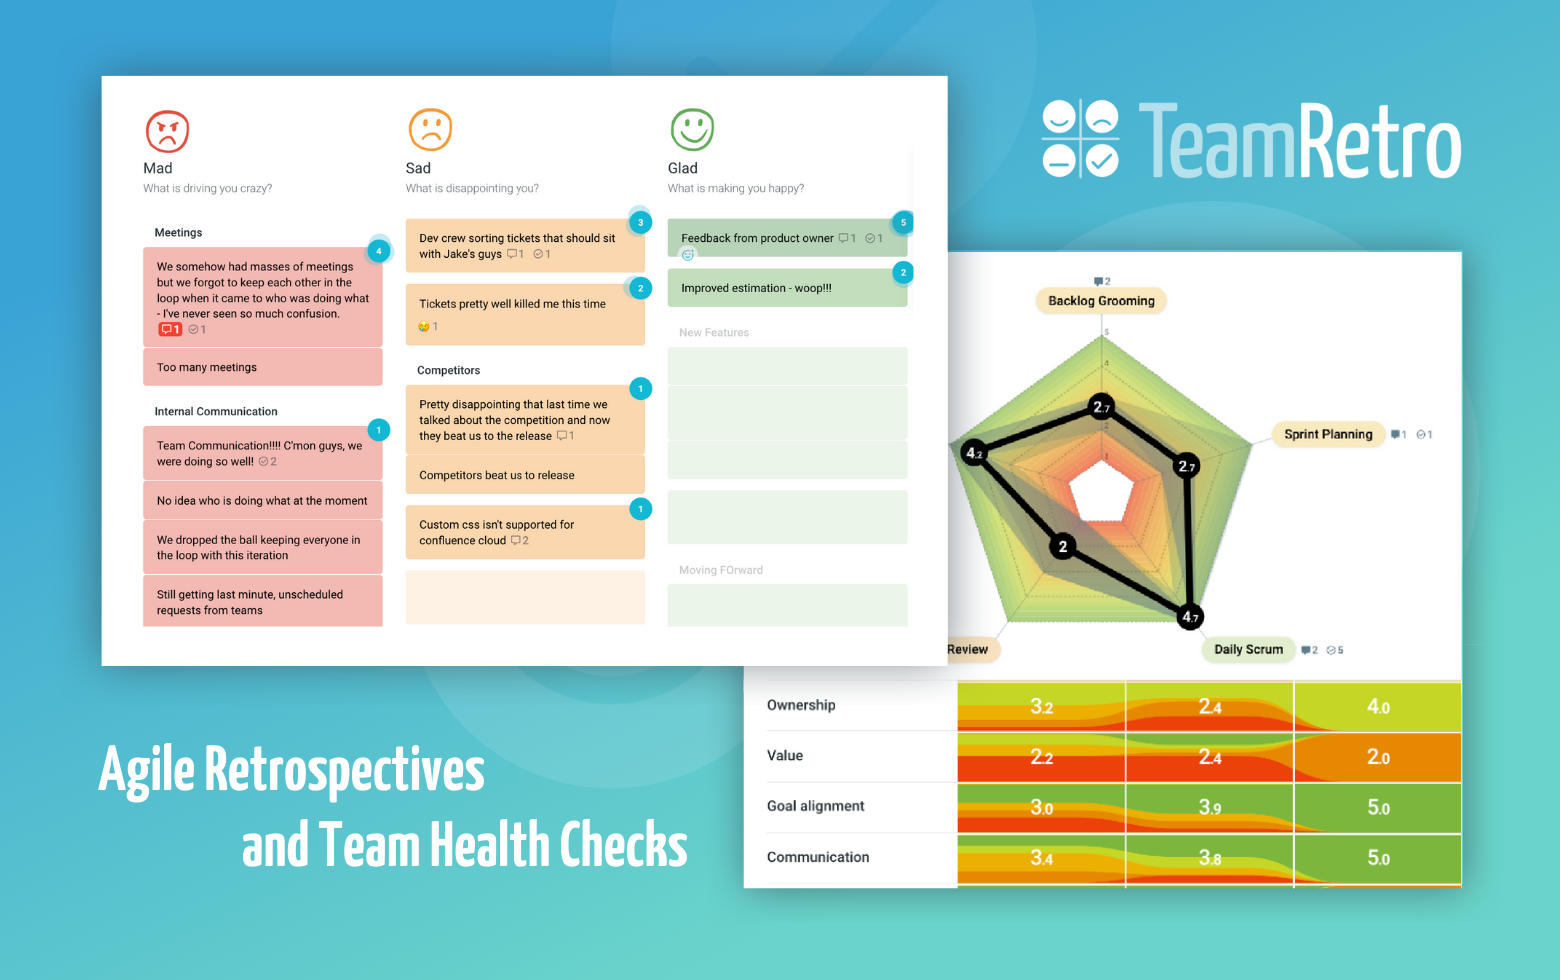 TeamRetro is a secure, enterprise-ready online agile retrospective and team health check tool for co-located, remote and hybrid teams. It is an intuitive tool with guided retrospective techniques and insightful health checks.